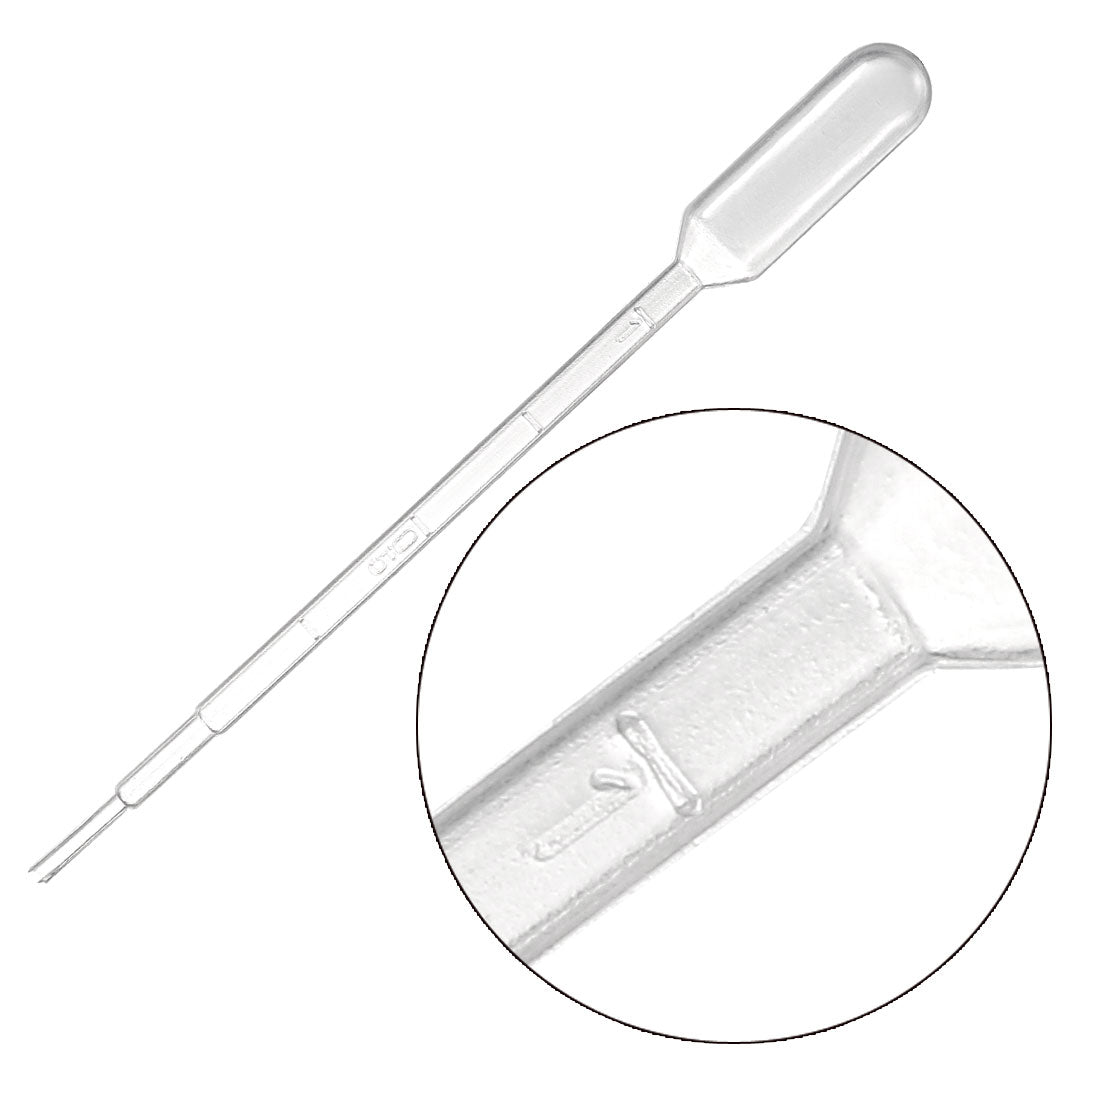 uxcell Uxcell 50 Pcs 1ml Disposable Pasteur Pipettes Test Tubes Liquid Drop Droppers Graduated 144mm Long